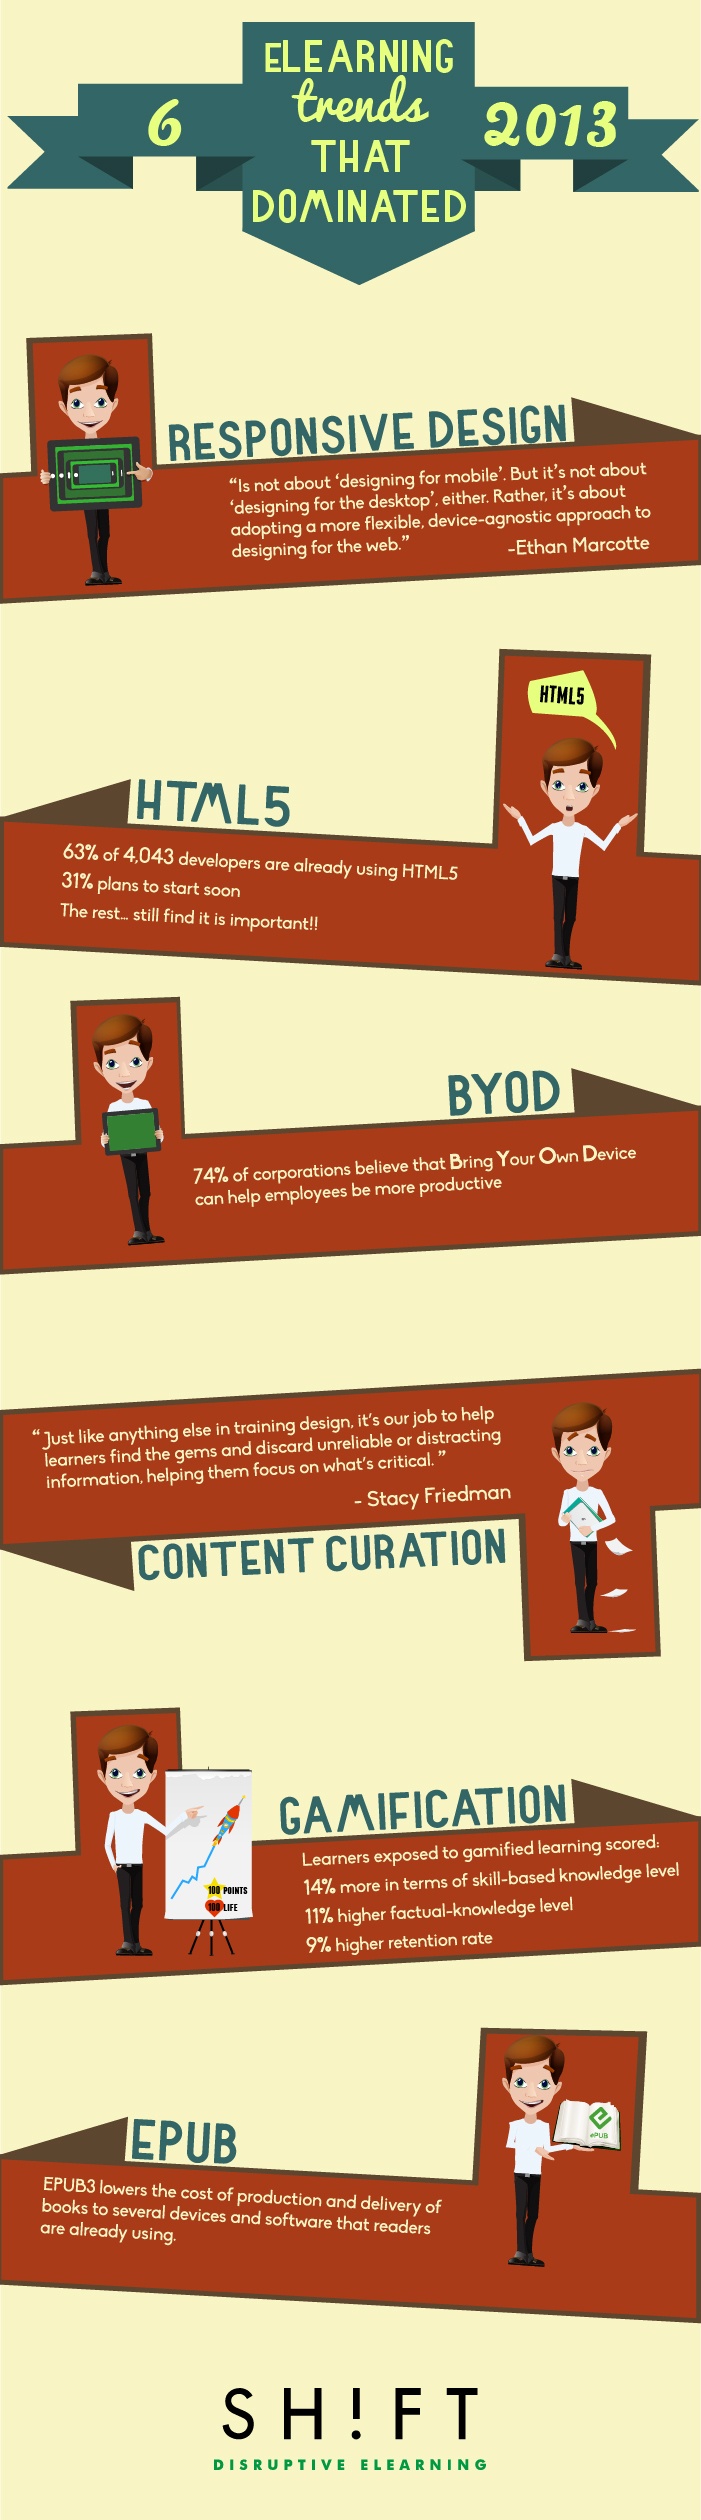 eLearning Trends 2013 Infographic